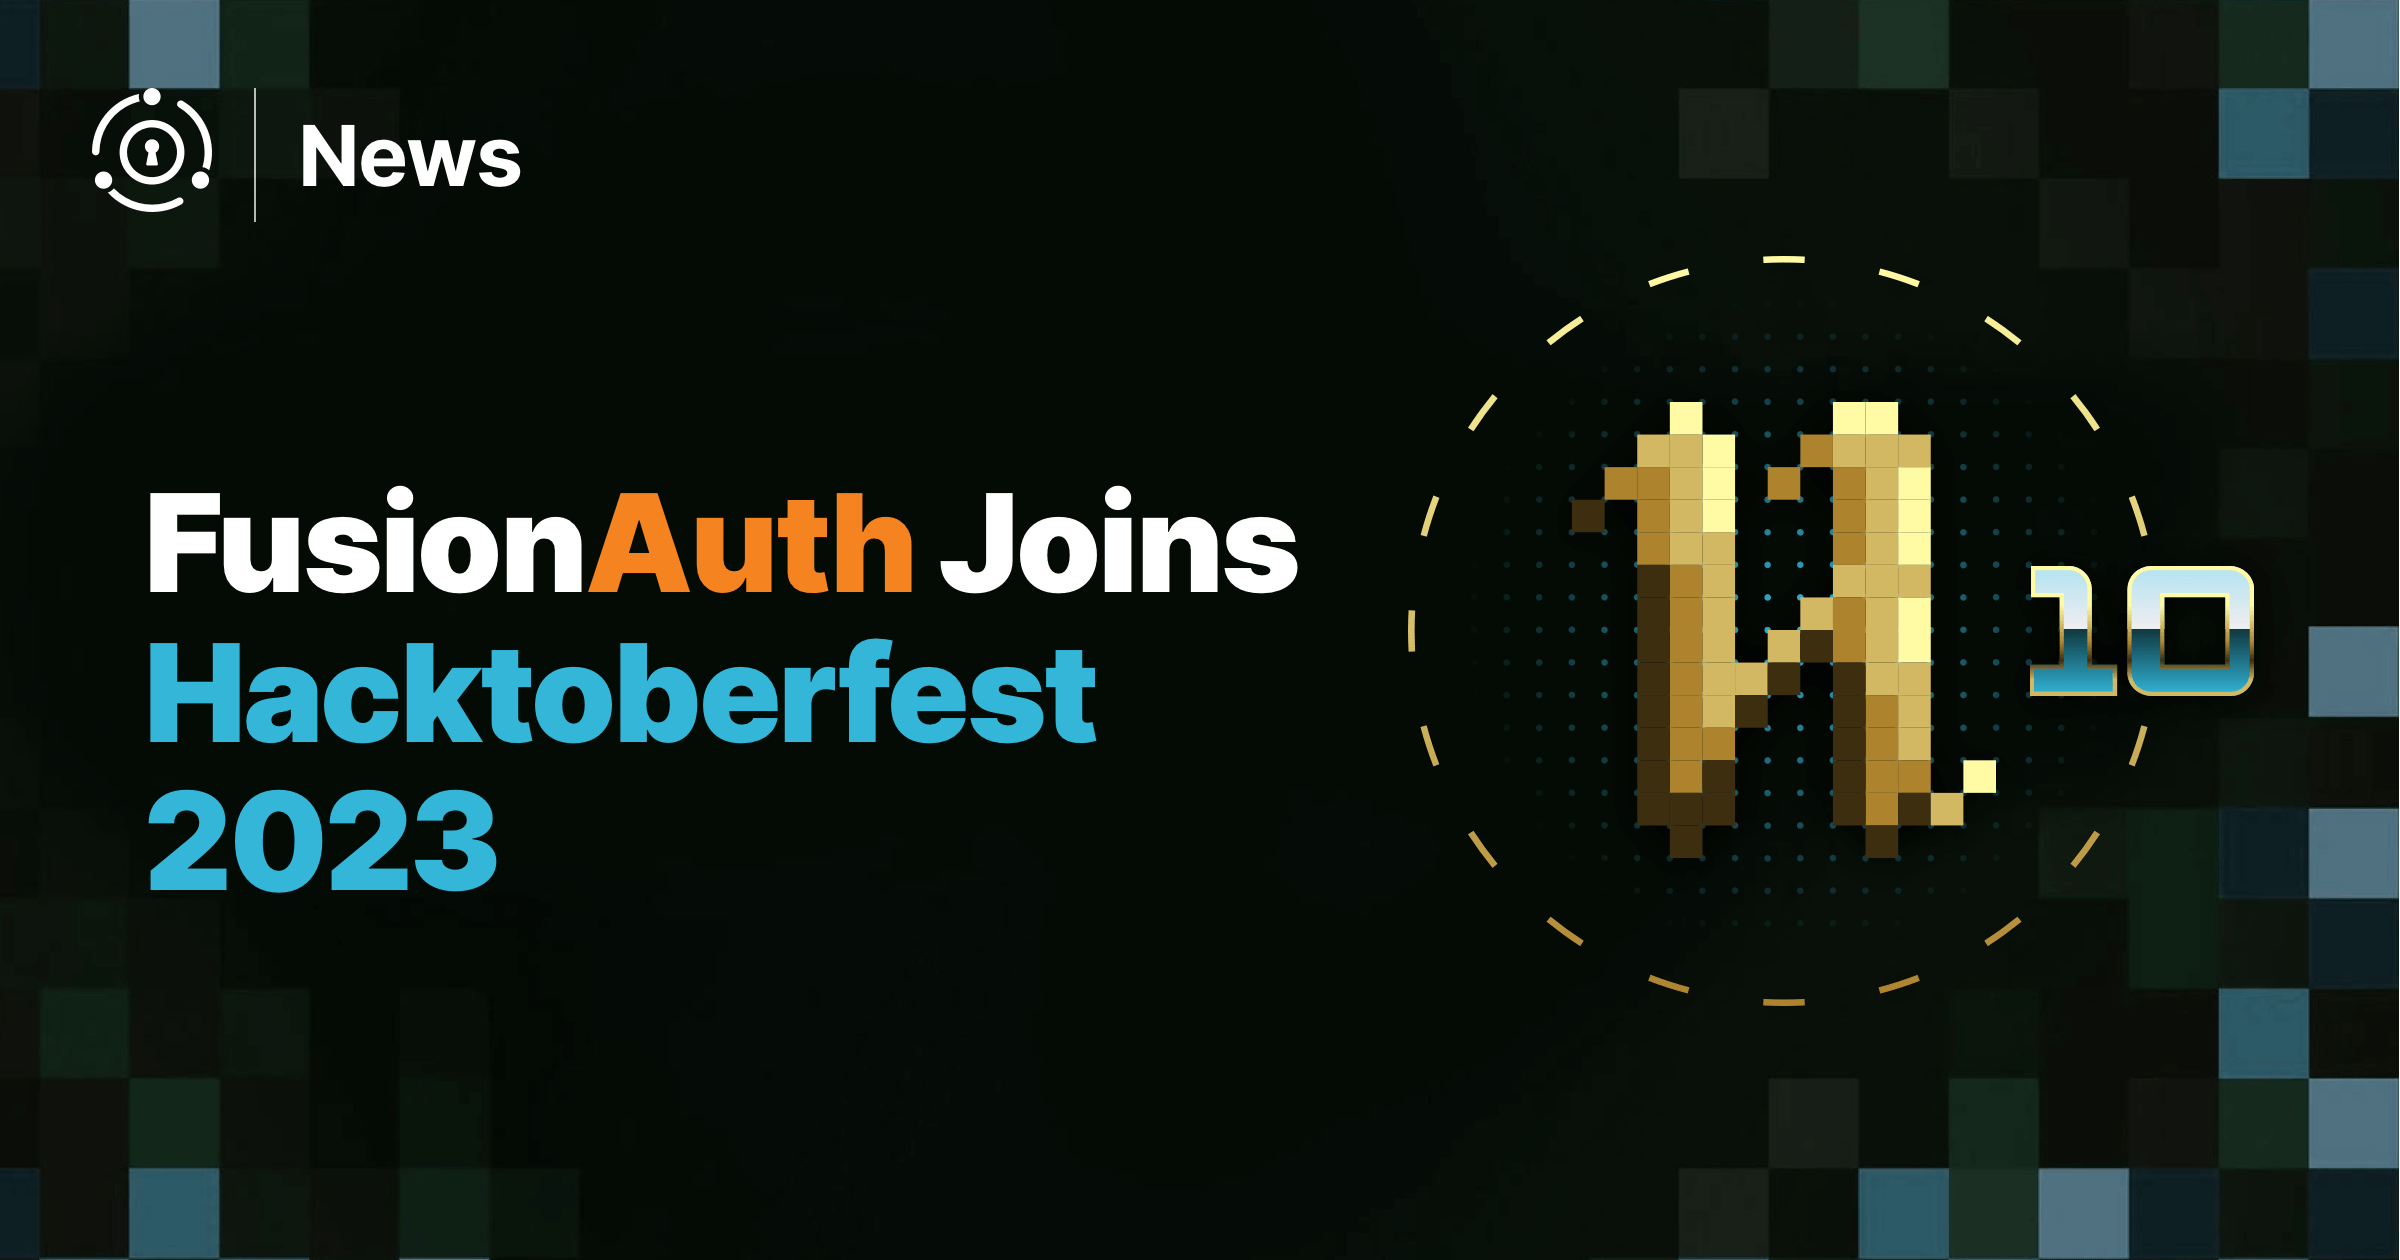 Hacktoberfest 2023 with FusionAuth